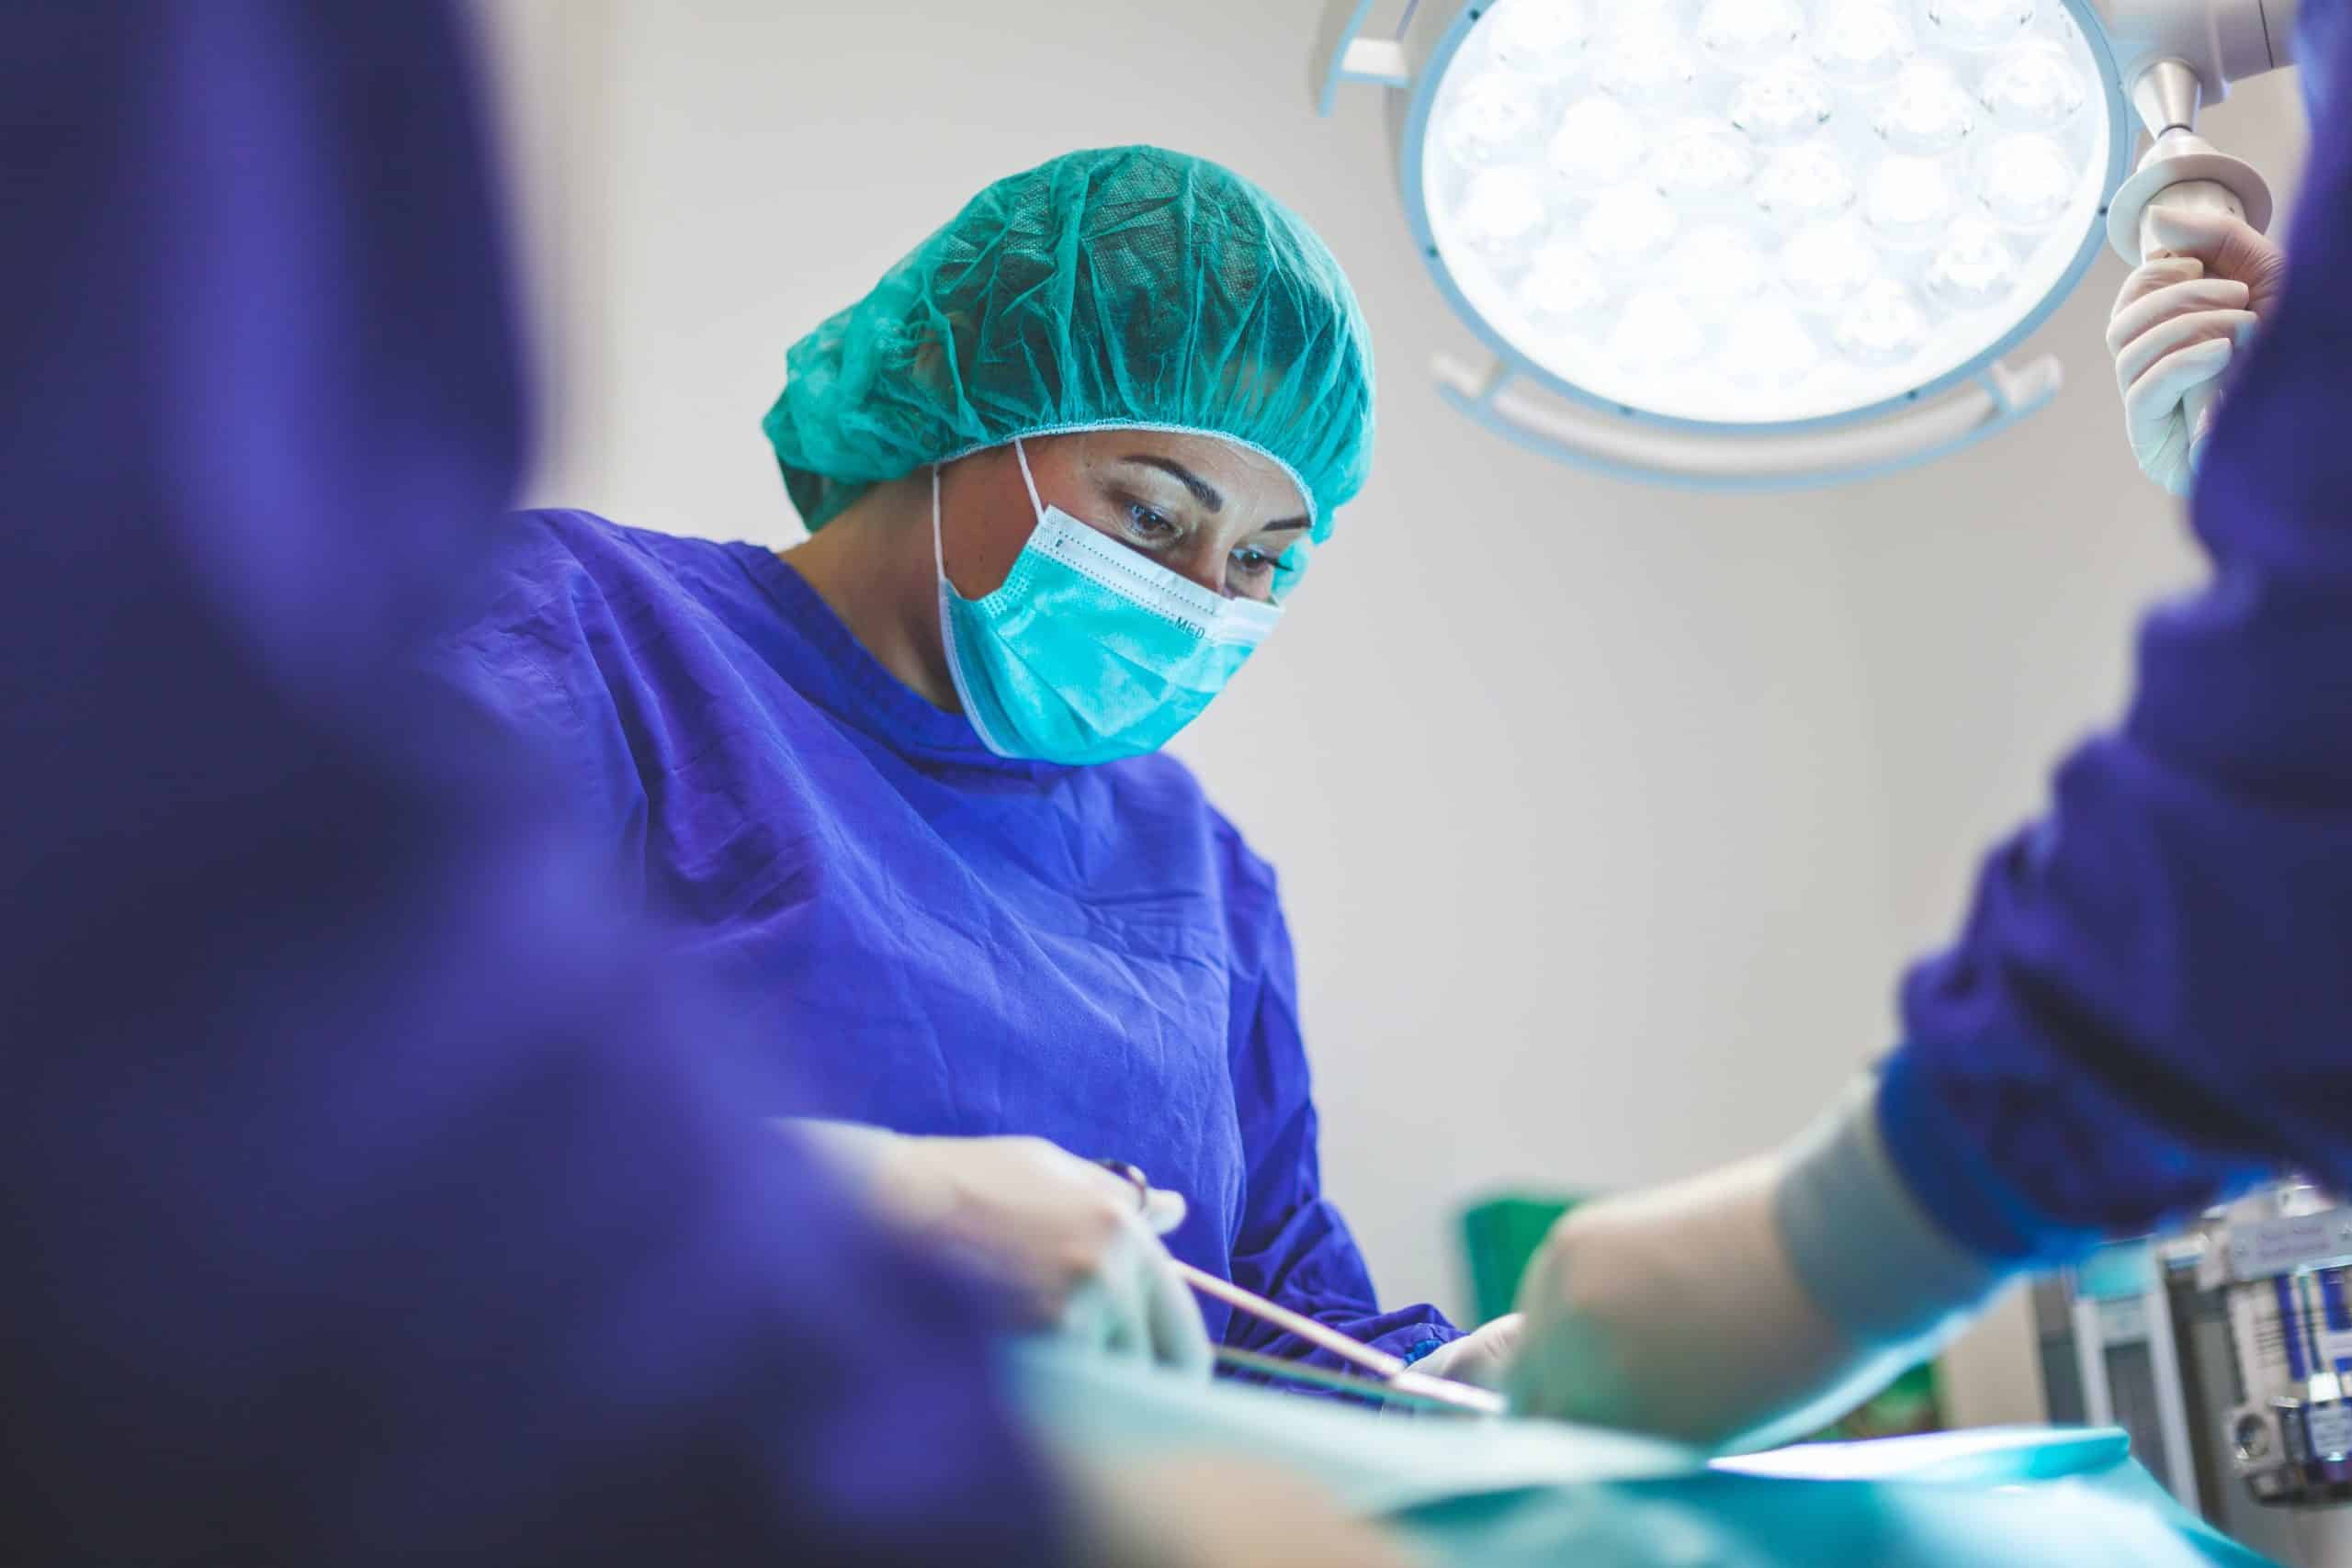 Lynks connects the operating theater to the rest of the world